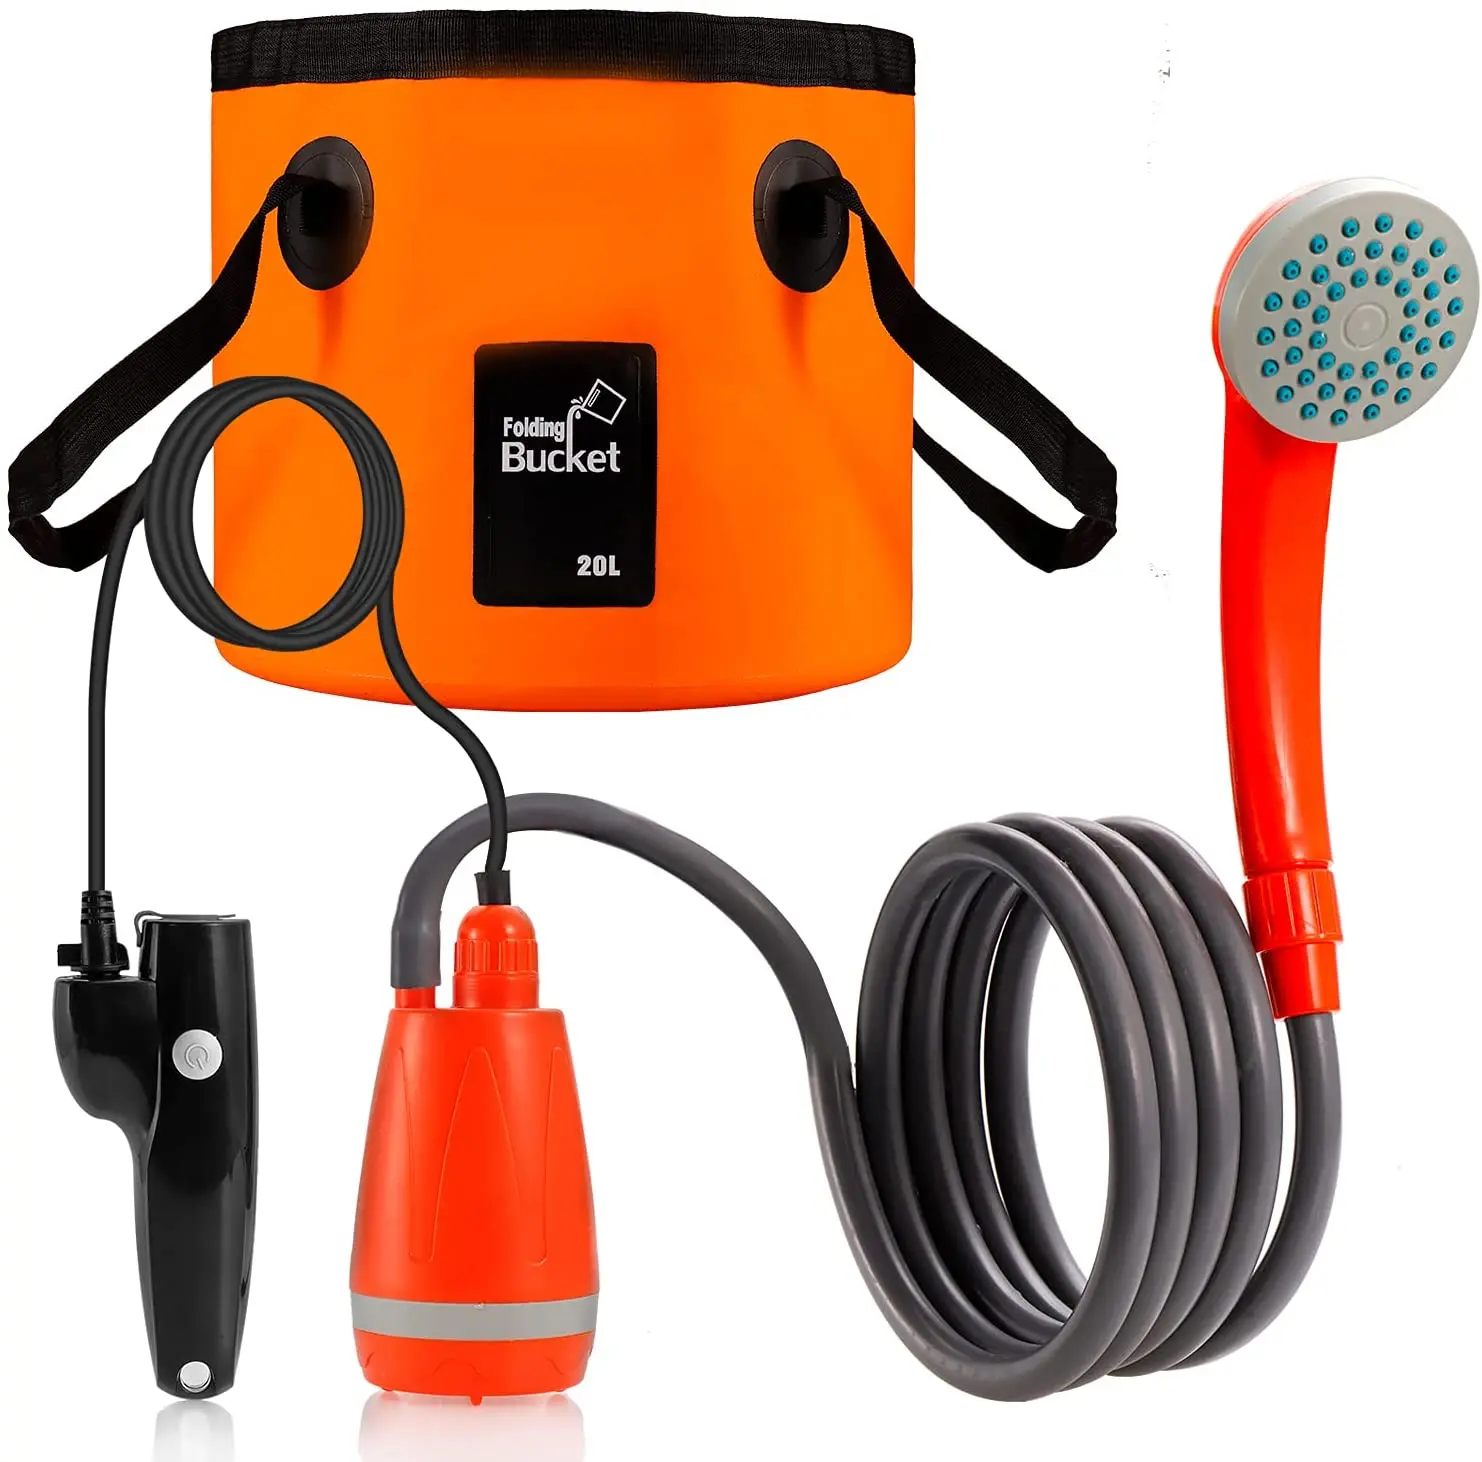 

Portable camping shower set, outdoor waterproof camping shower pump,12V car outdoor shower, rechargeable, folding bucket, Customized color